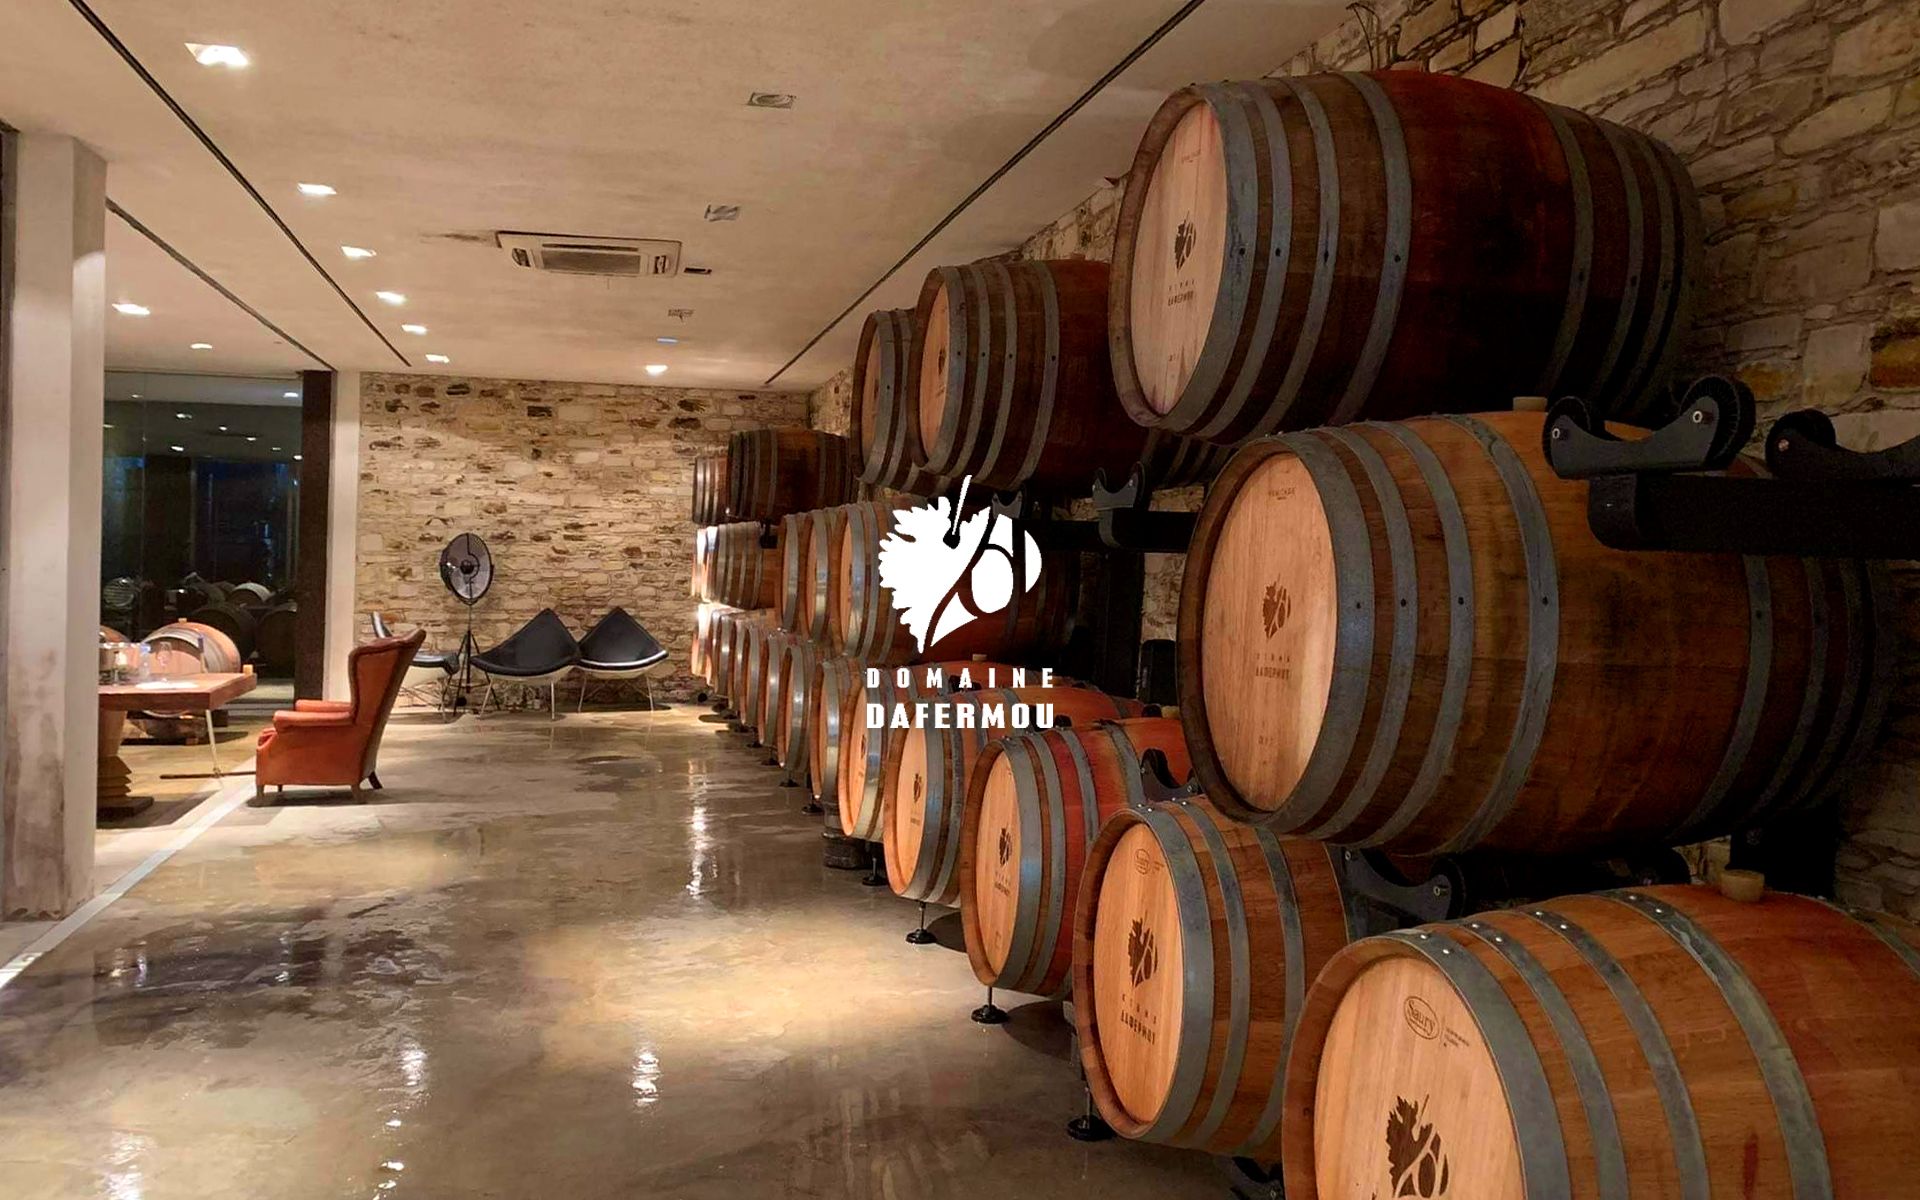 Ktima Dafermou Winery in Cyprus